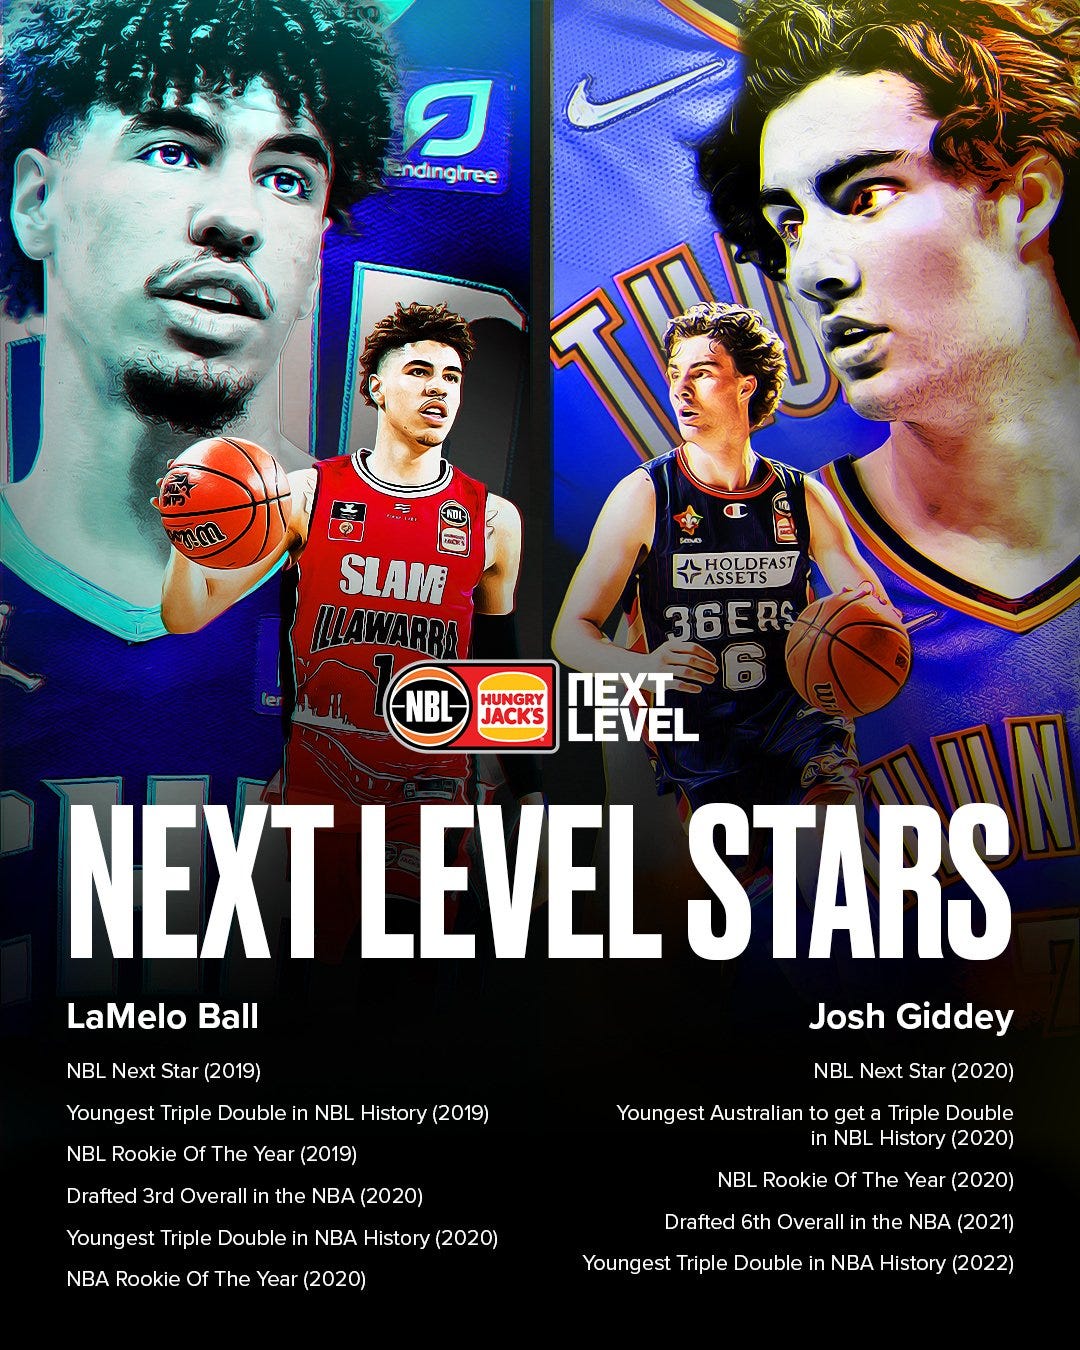 The NBL on Twitter: "The Next Stars taking their games to the Next Level.  LaMelo Ball and Josh Giddey are putting together some seriously impressive  resumes 👀 #NBLxNBA https://t.co/VV9hJ1lYyV" / Twitter